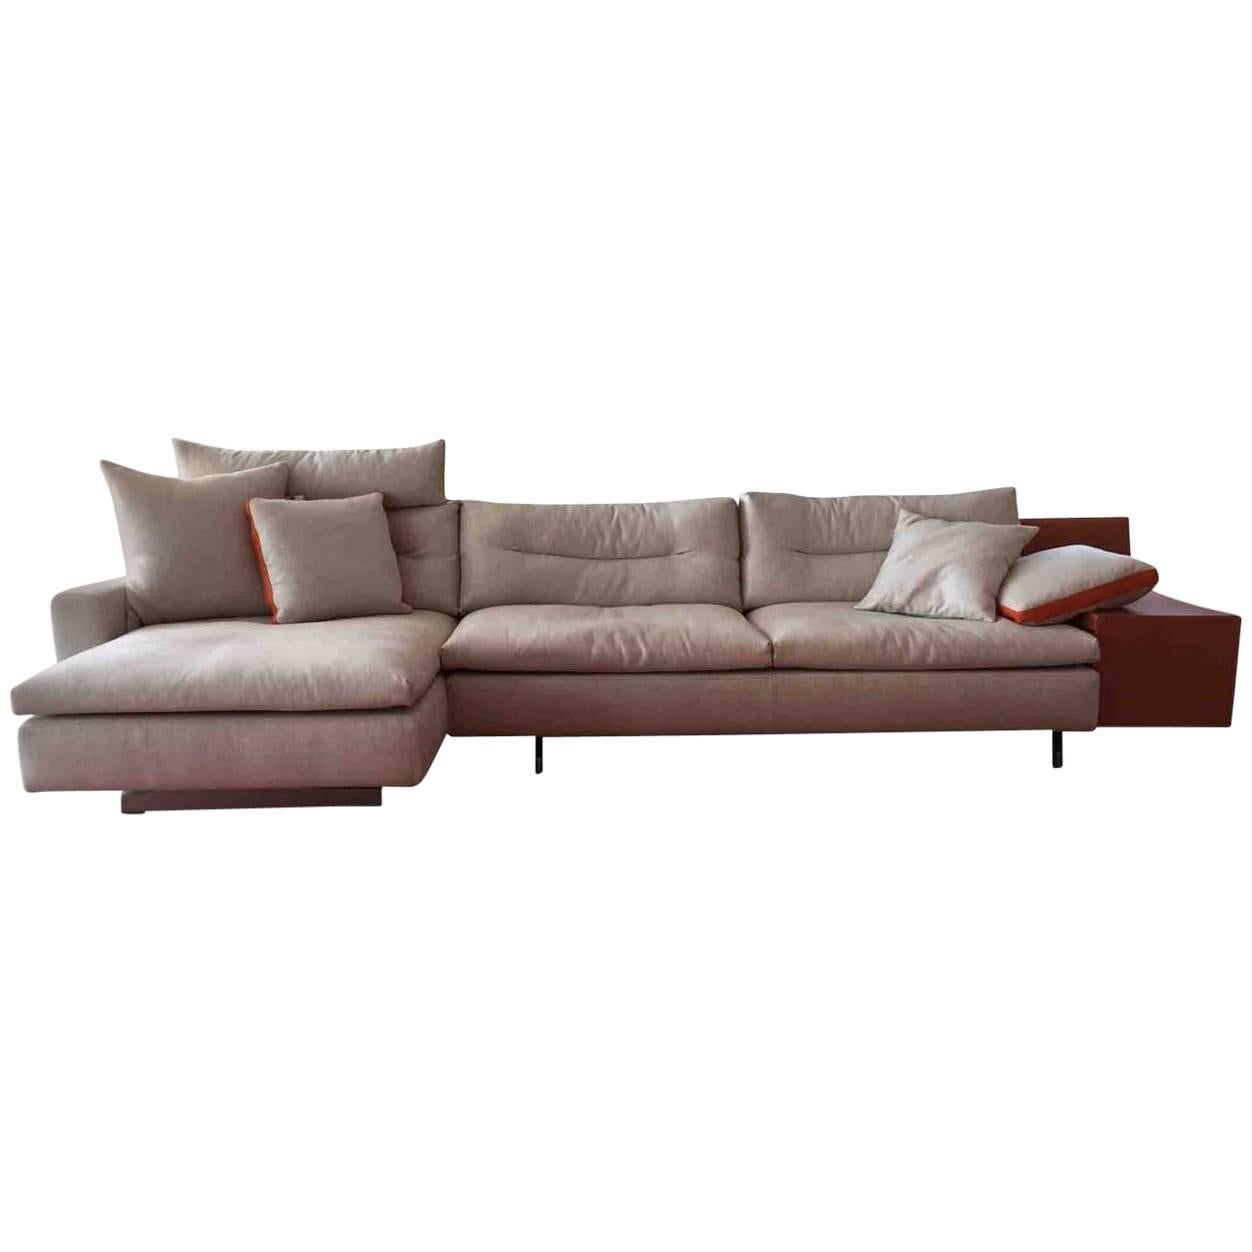 Sofa "Grantorino" by Manufacturer Poltrona Frau in Aluminum, Leather and Fabric For Sale